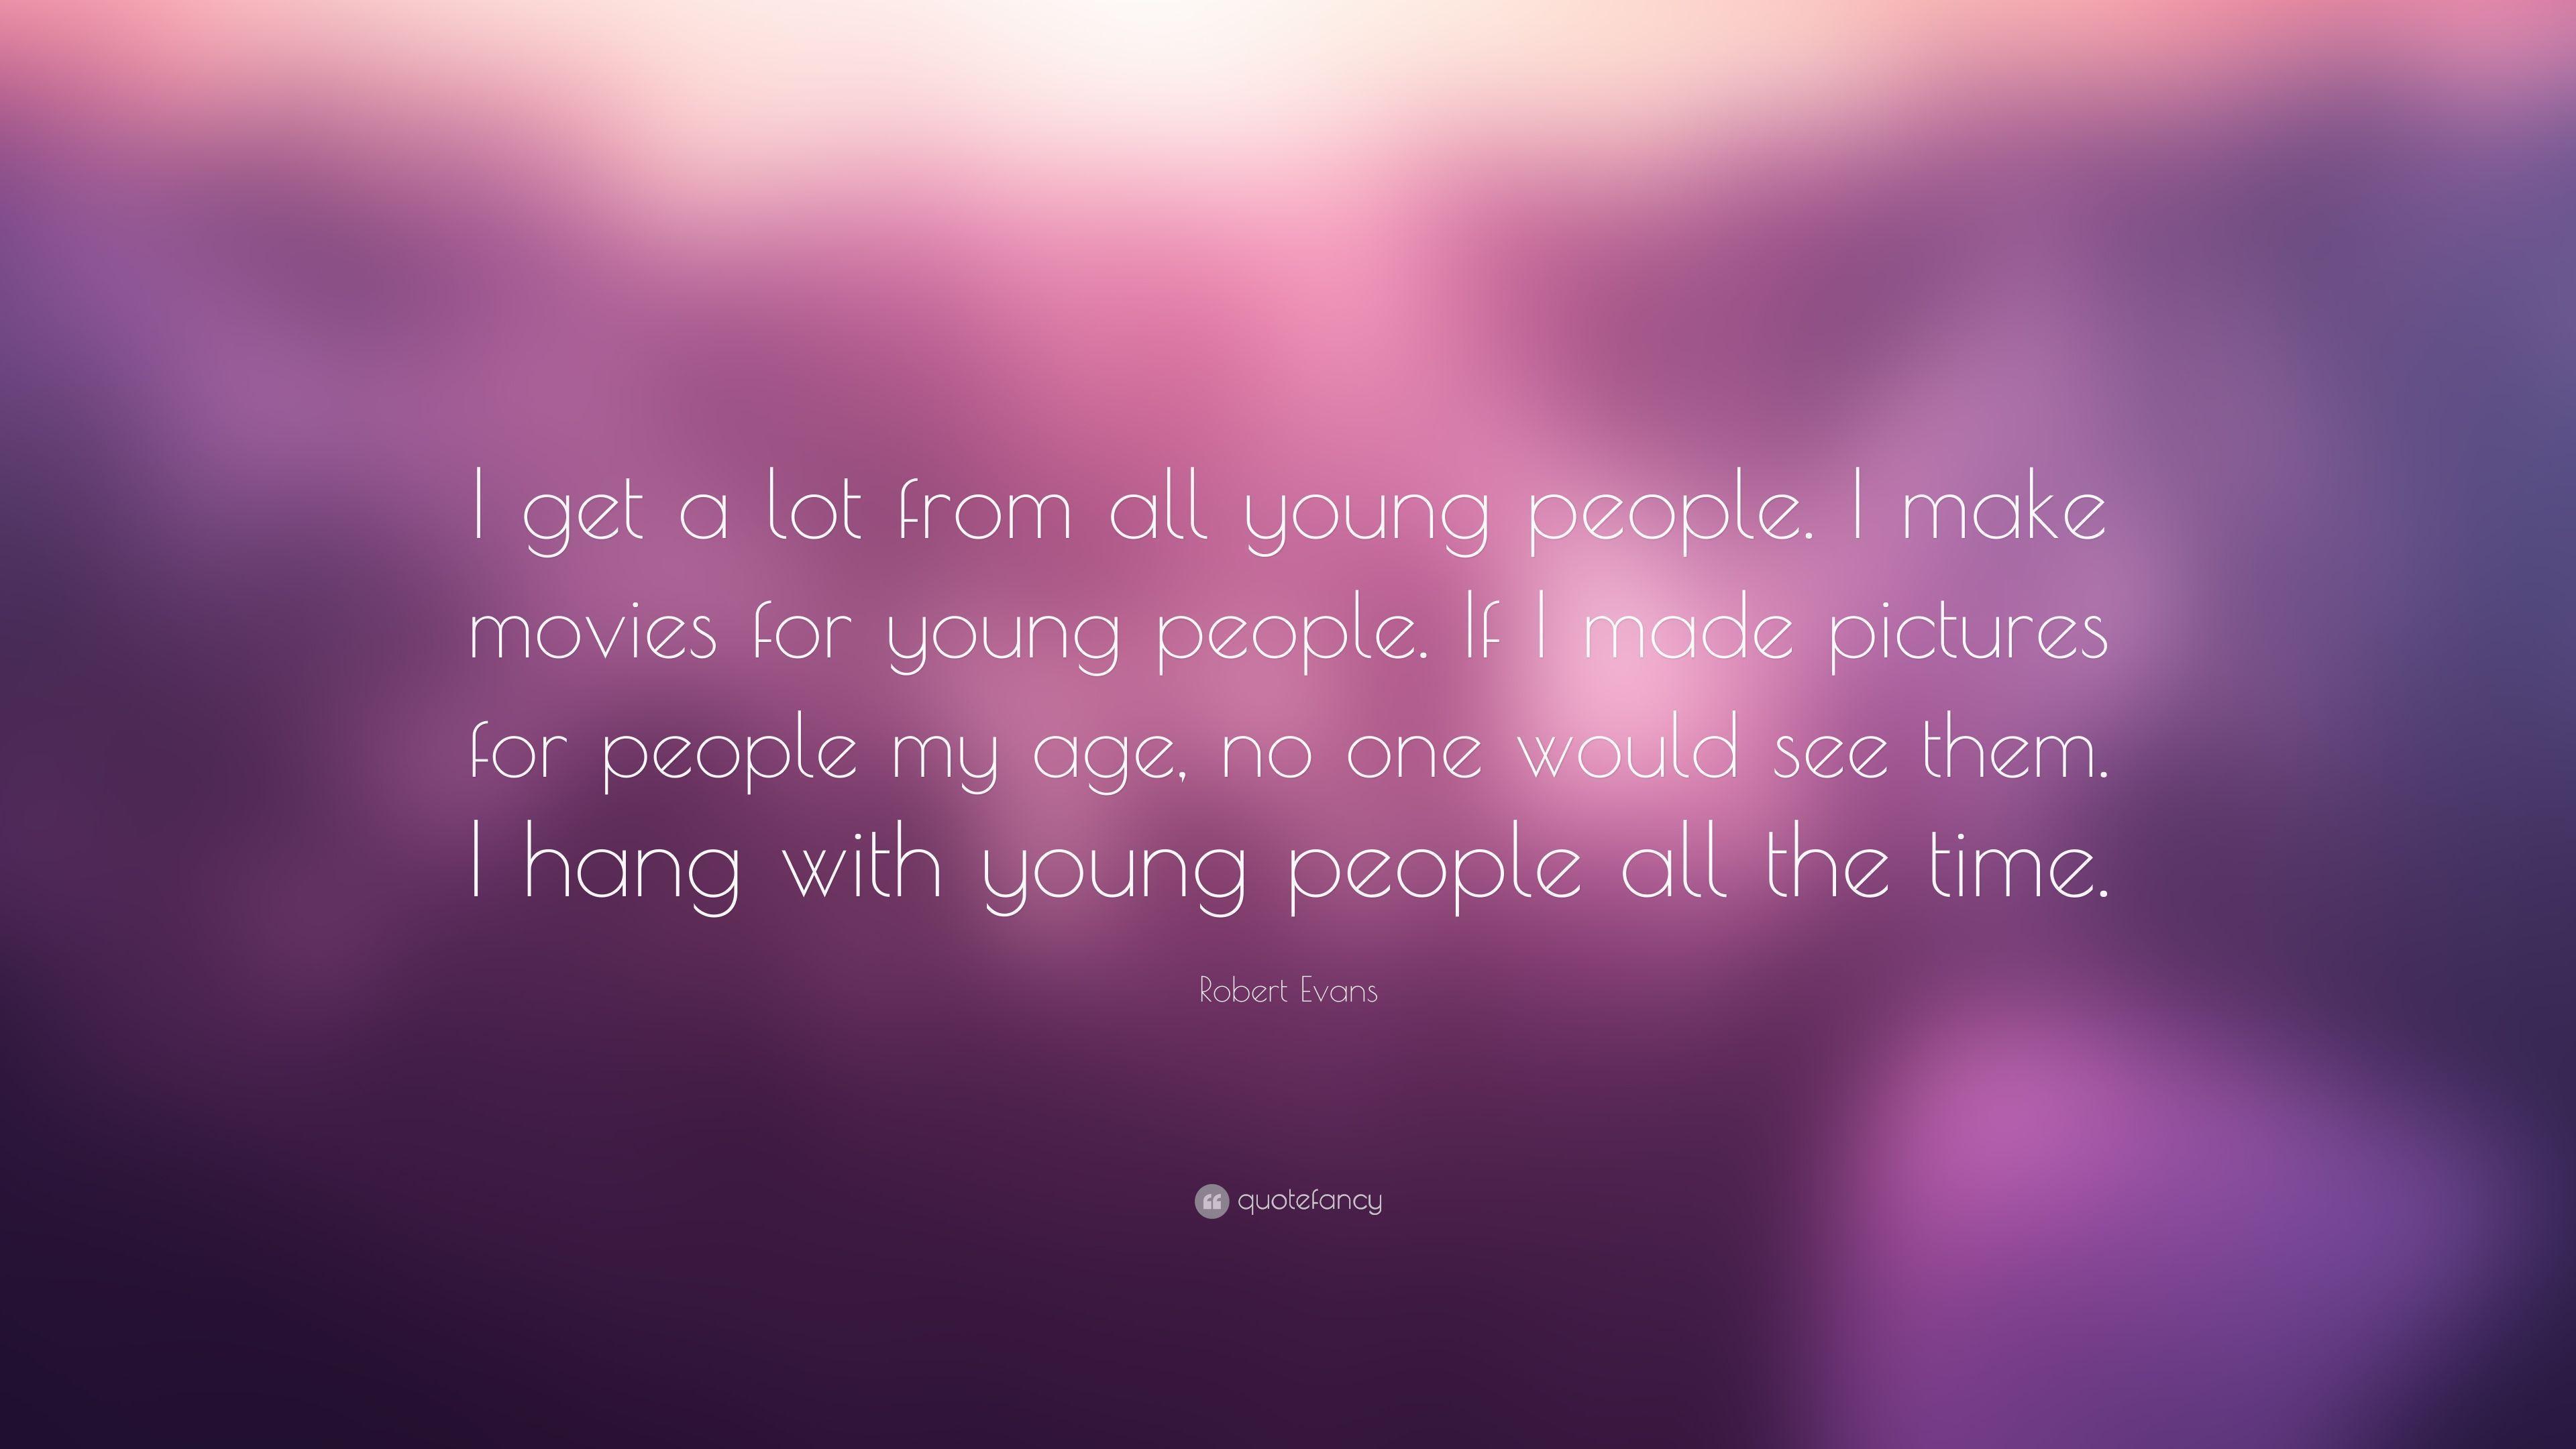 Robert Evans Quote: “I get a lot from all young people. I make